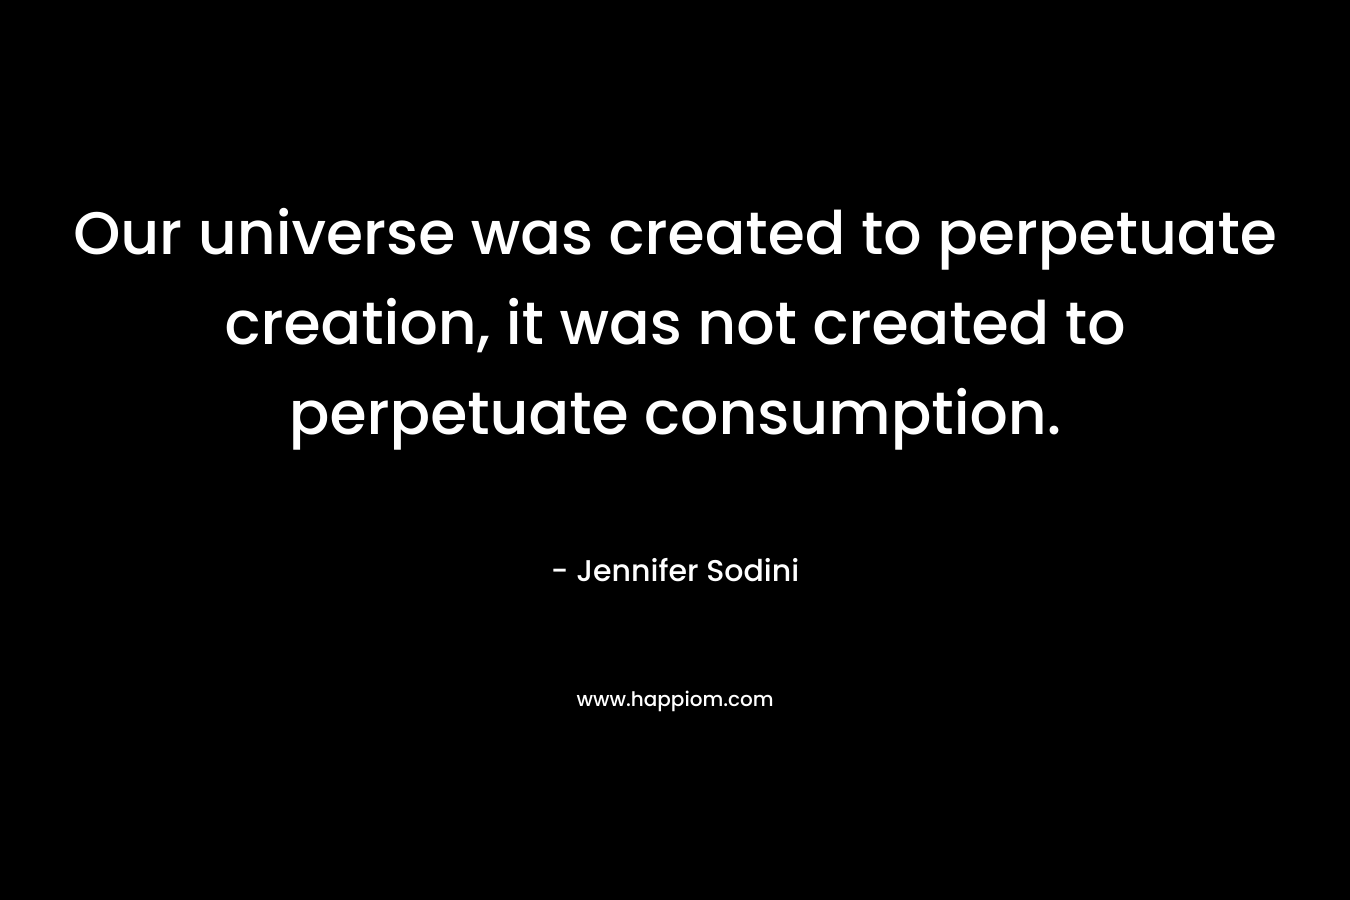 Our universe was created to perpetuate creation, it was not created to perpetuate consumption. – Jennifer Sodini